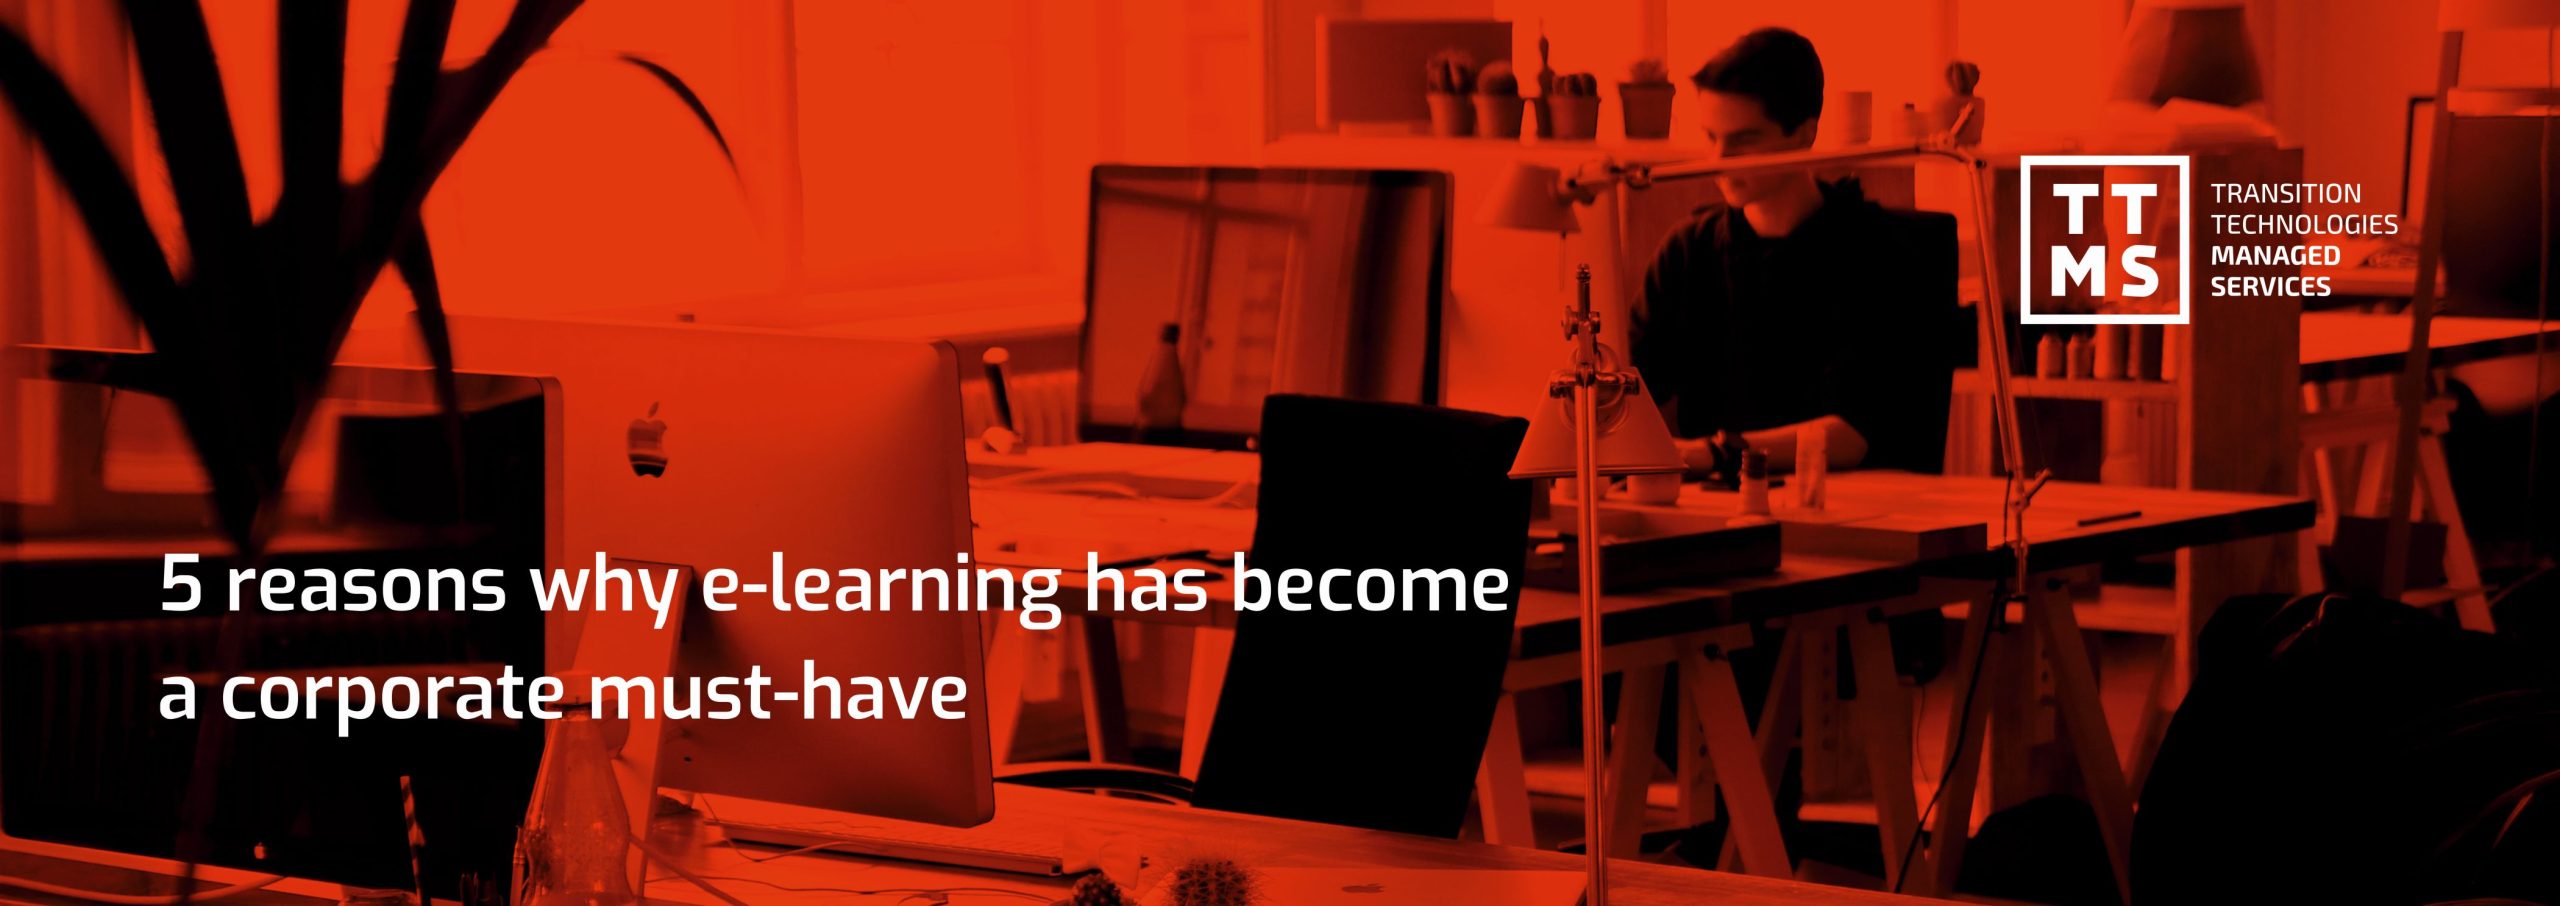 5 reasons why e-learning has become a corporate must-have